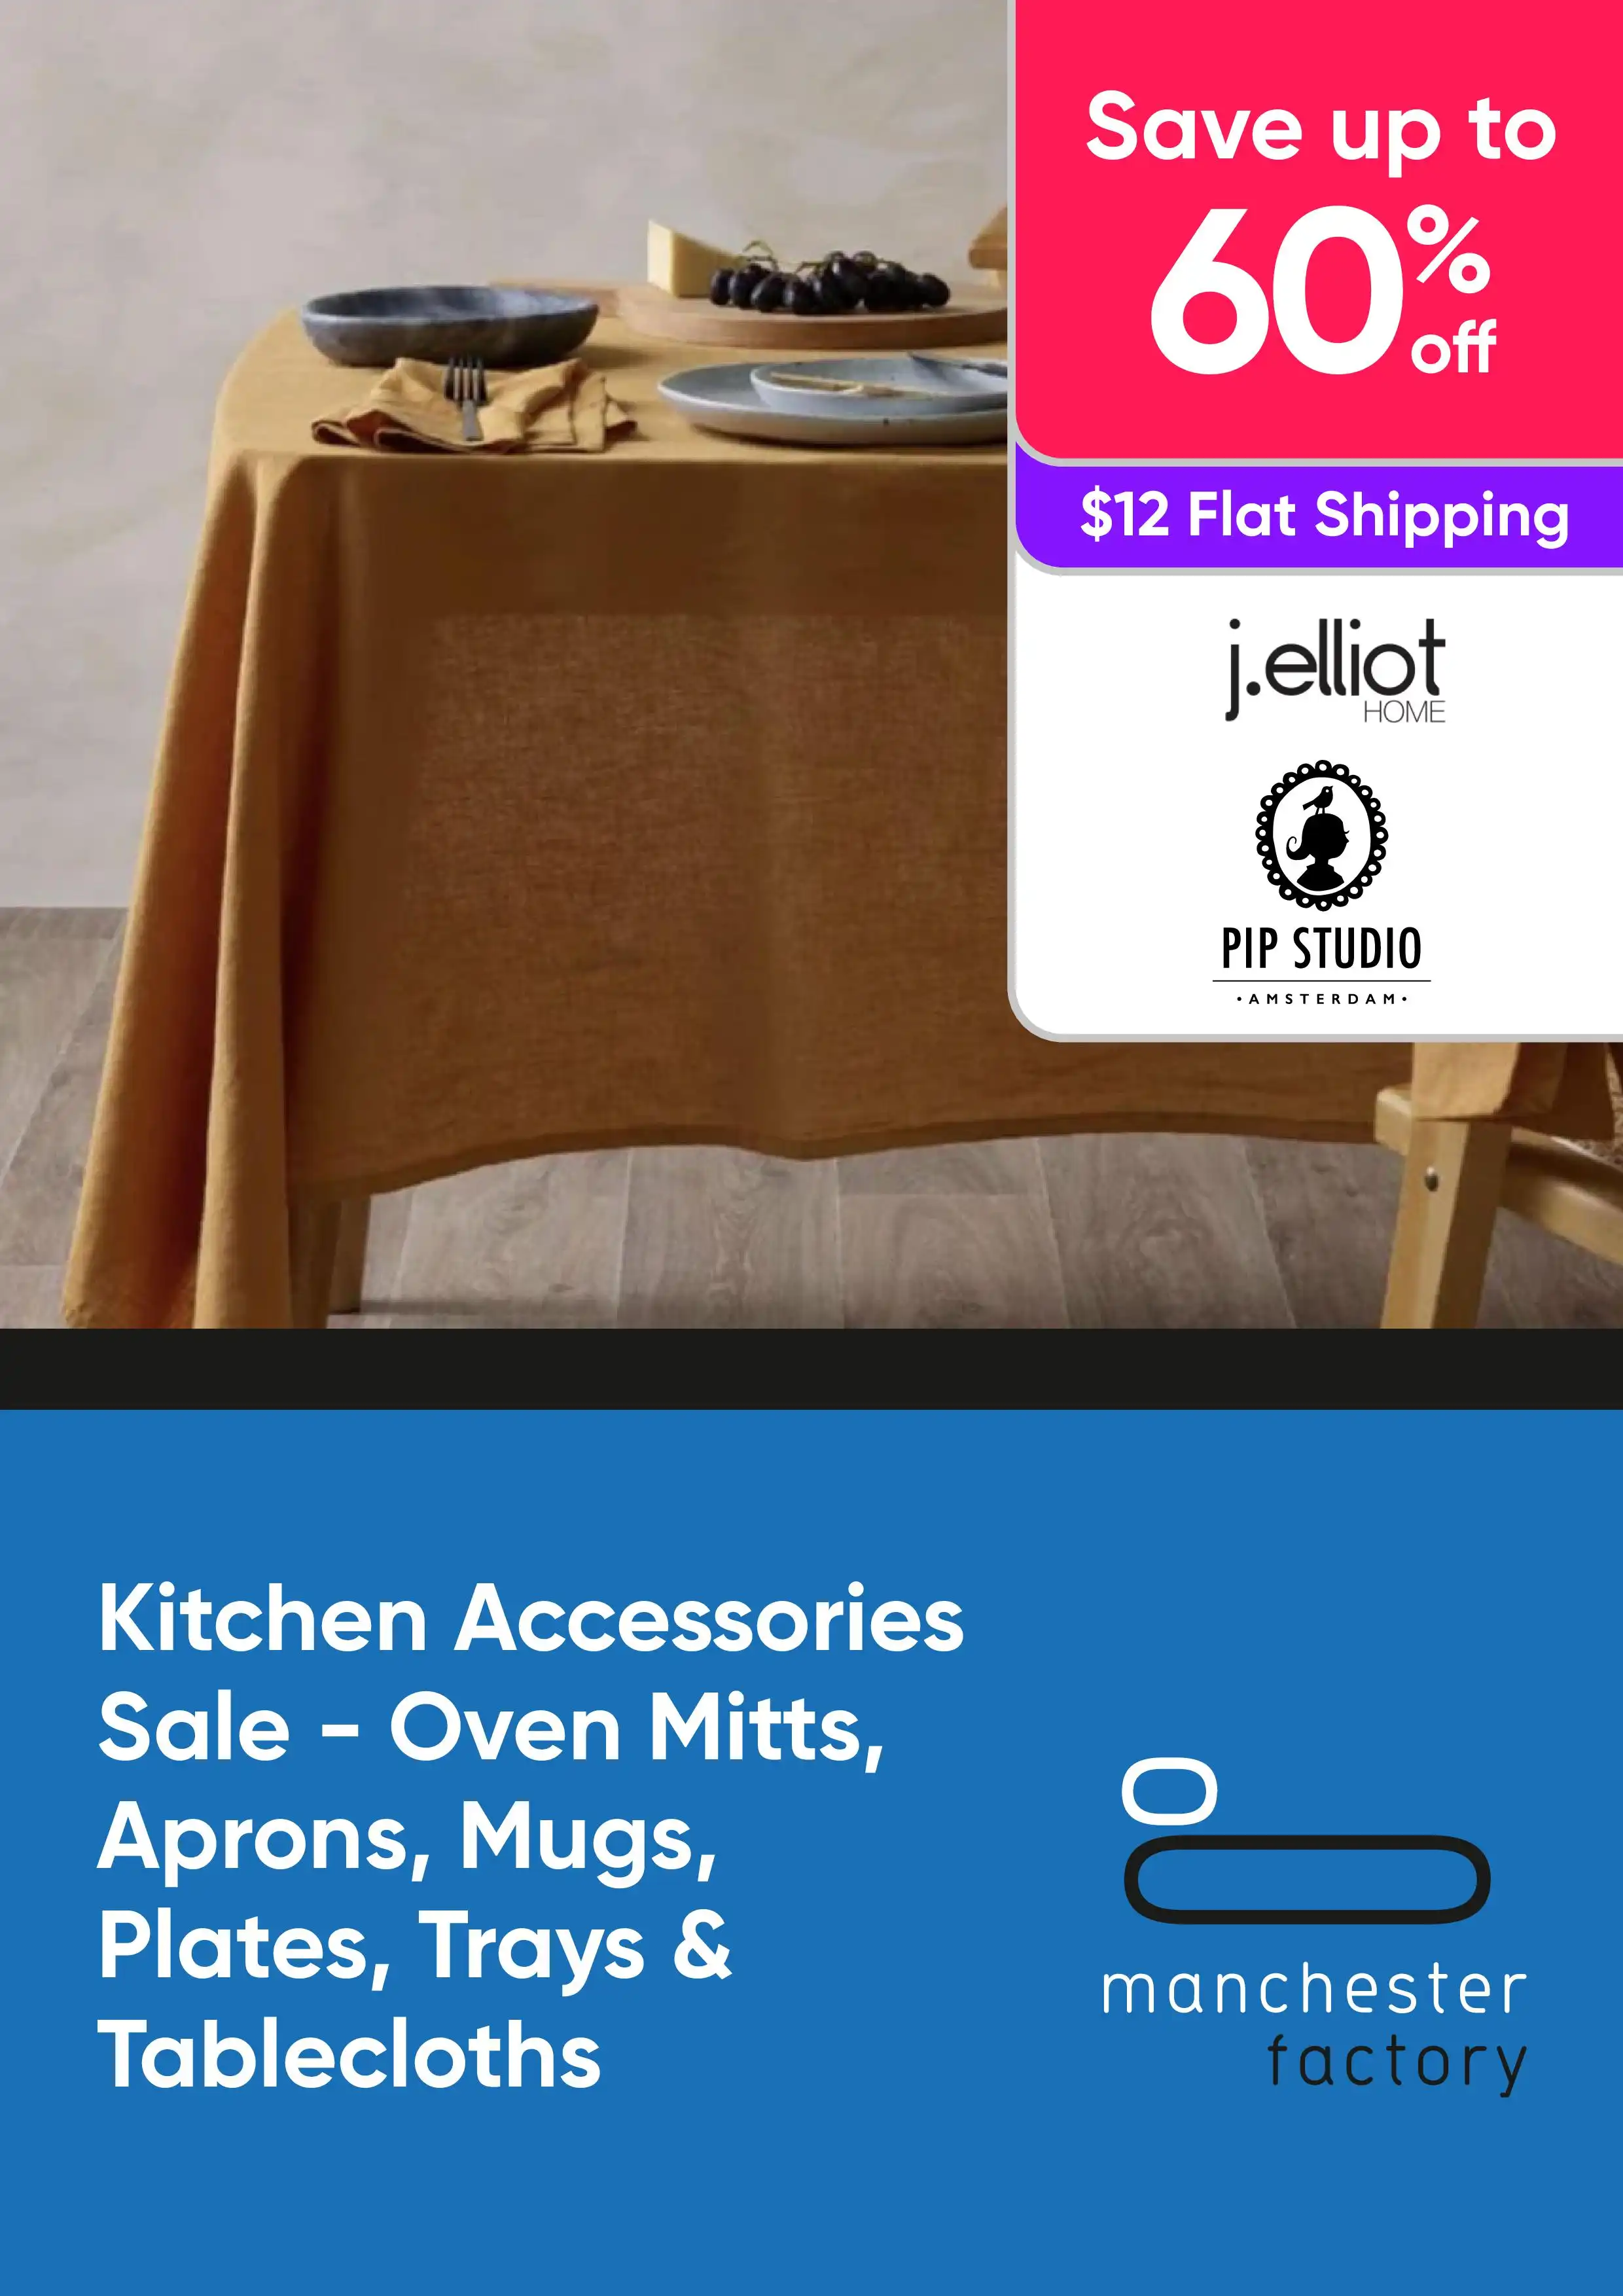 Kitchen Accessories Sale - Save Up to 60% Off on Oven Mits, Aprons, Mugs, Plates & More